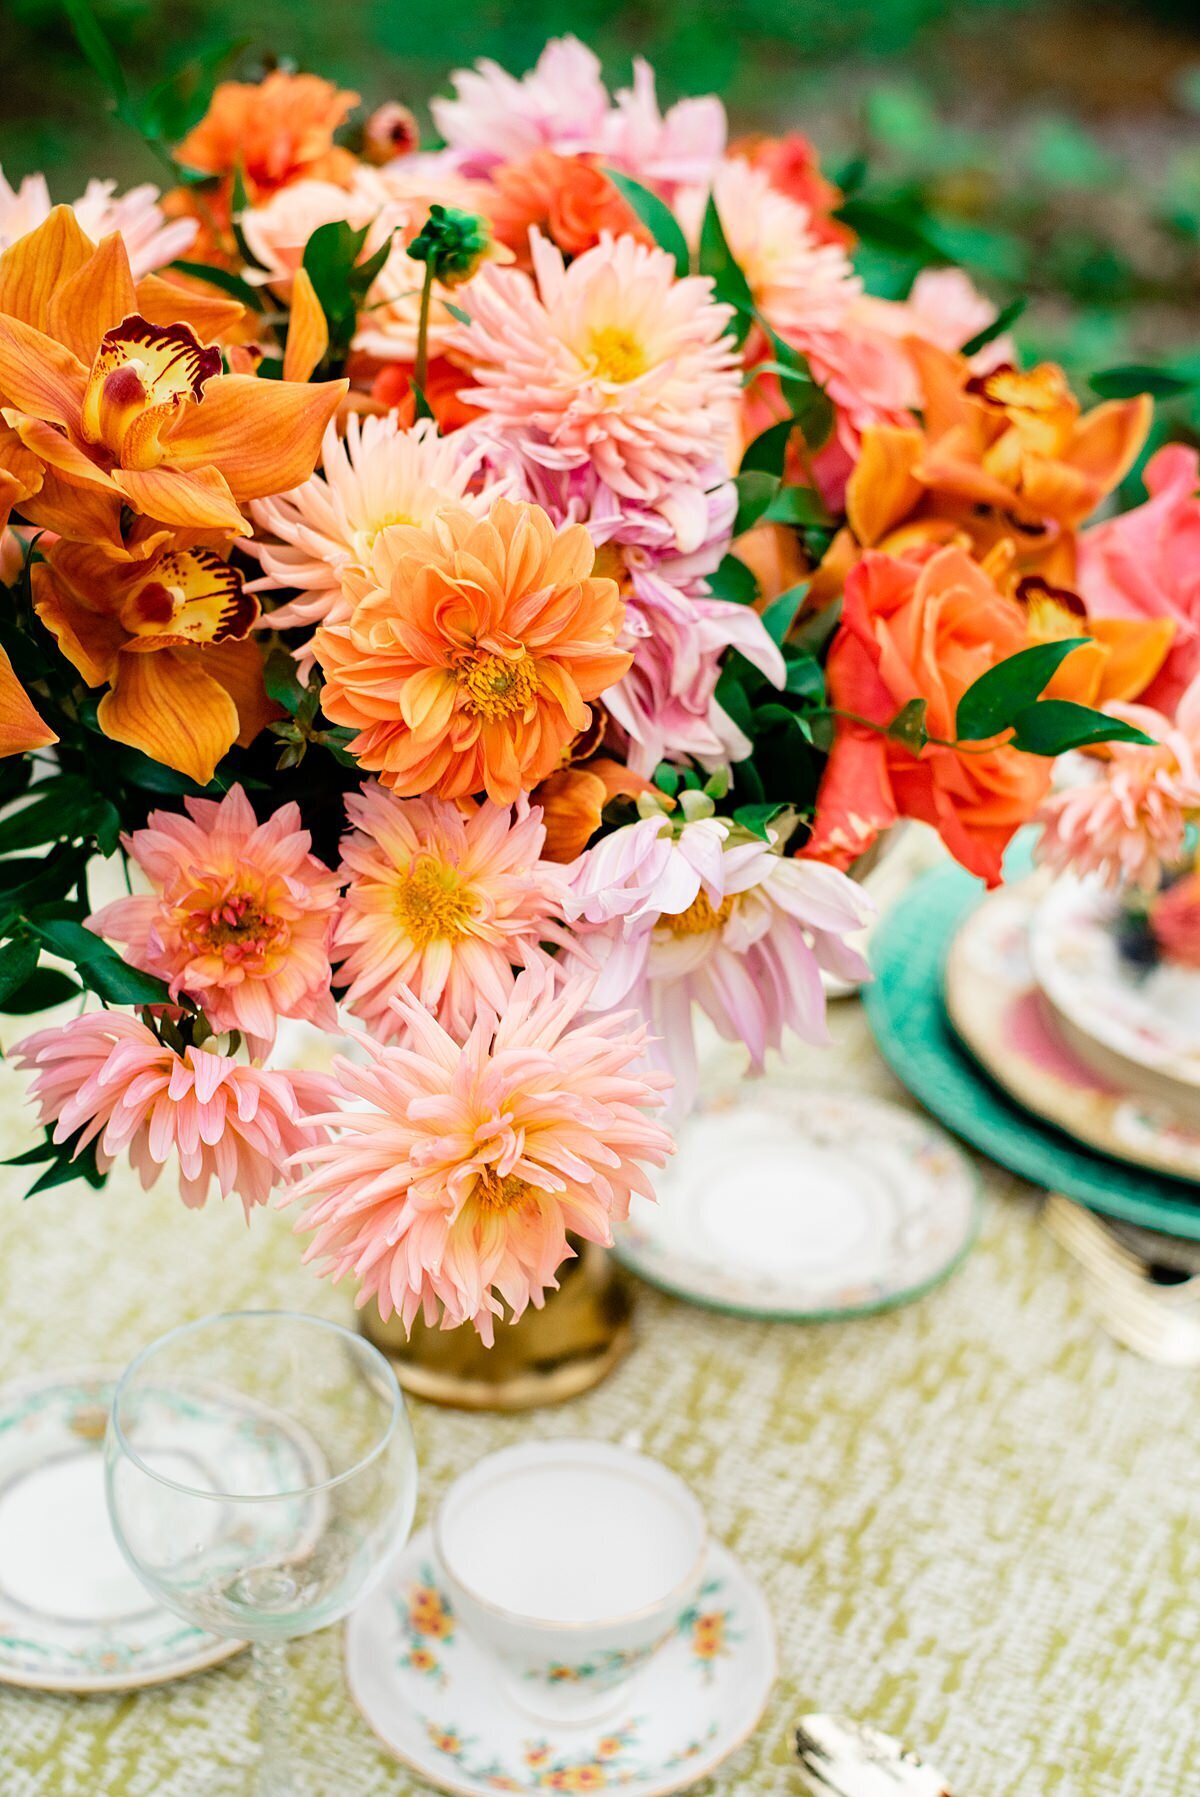 Compote with orange, pink lush flowers for a floral heavy compote centerpiece